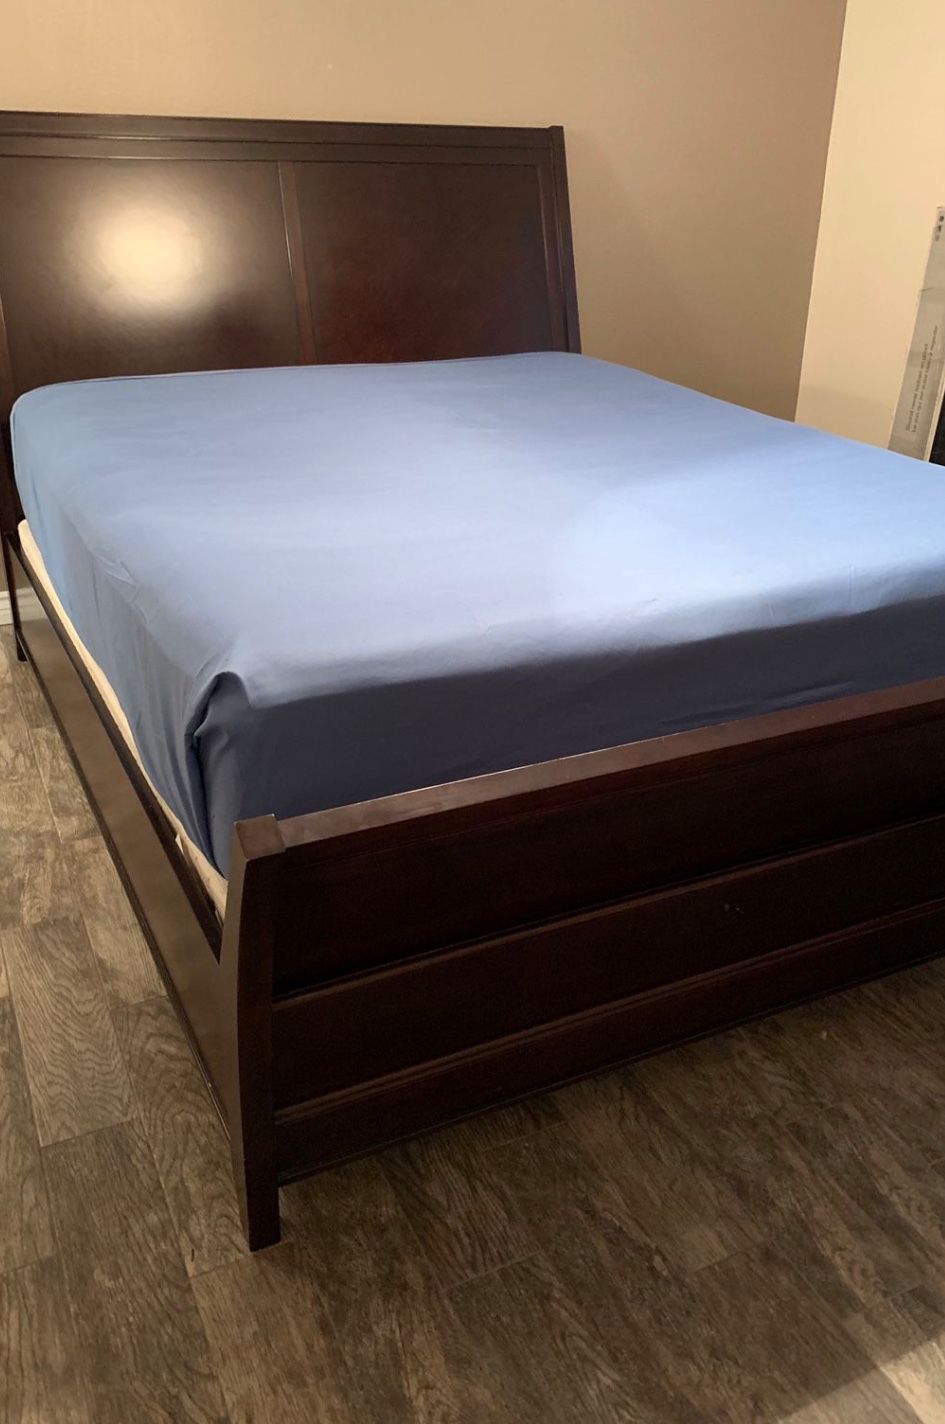 California King Bed And Frame 